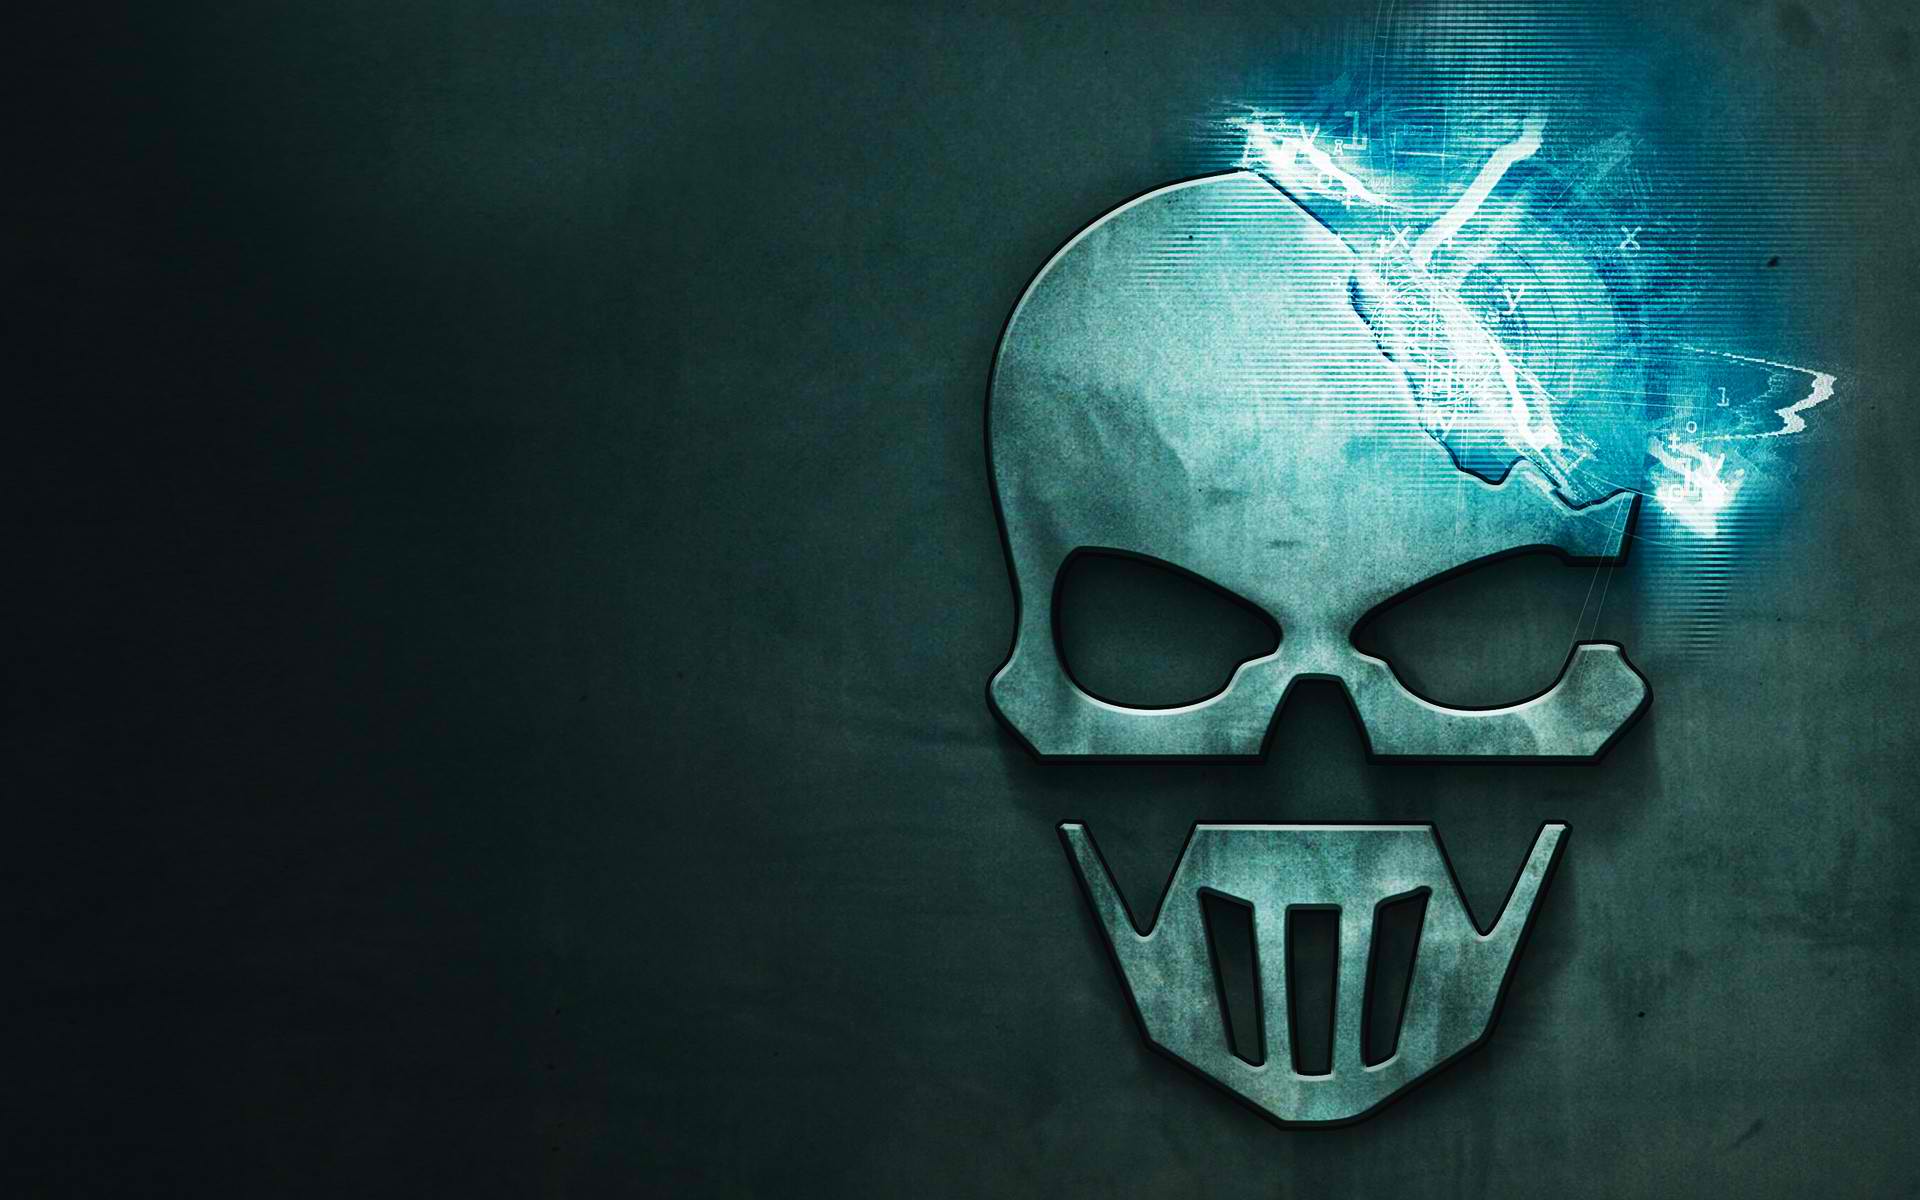 wallpaper4mecomimageswallpapersghost recon future soldier w1jpeg 1920x1200